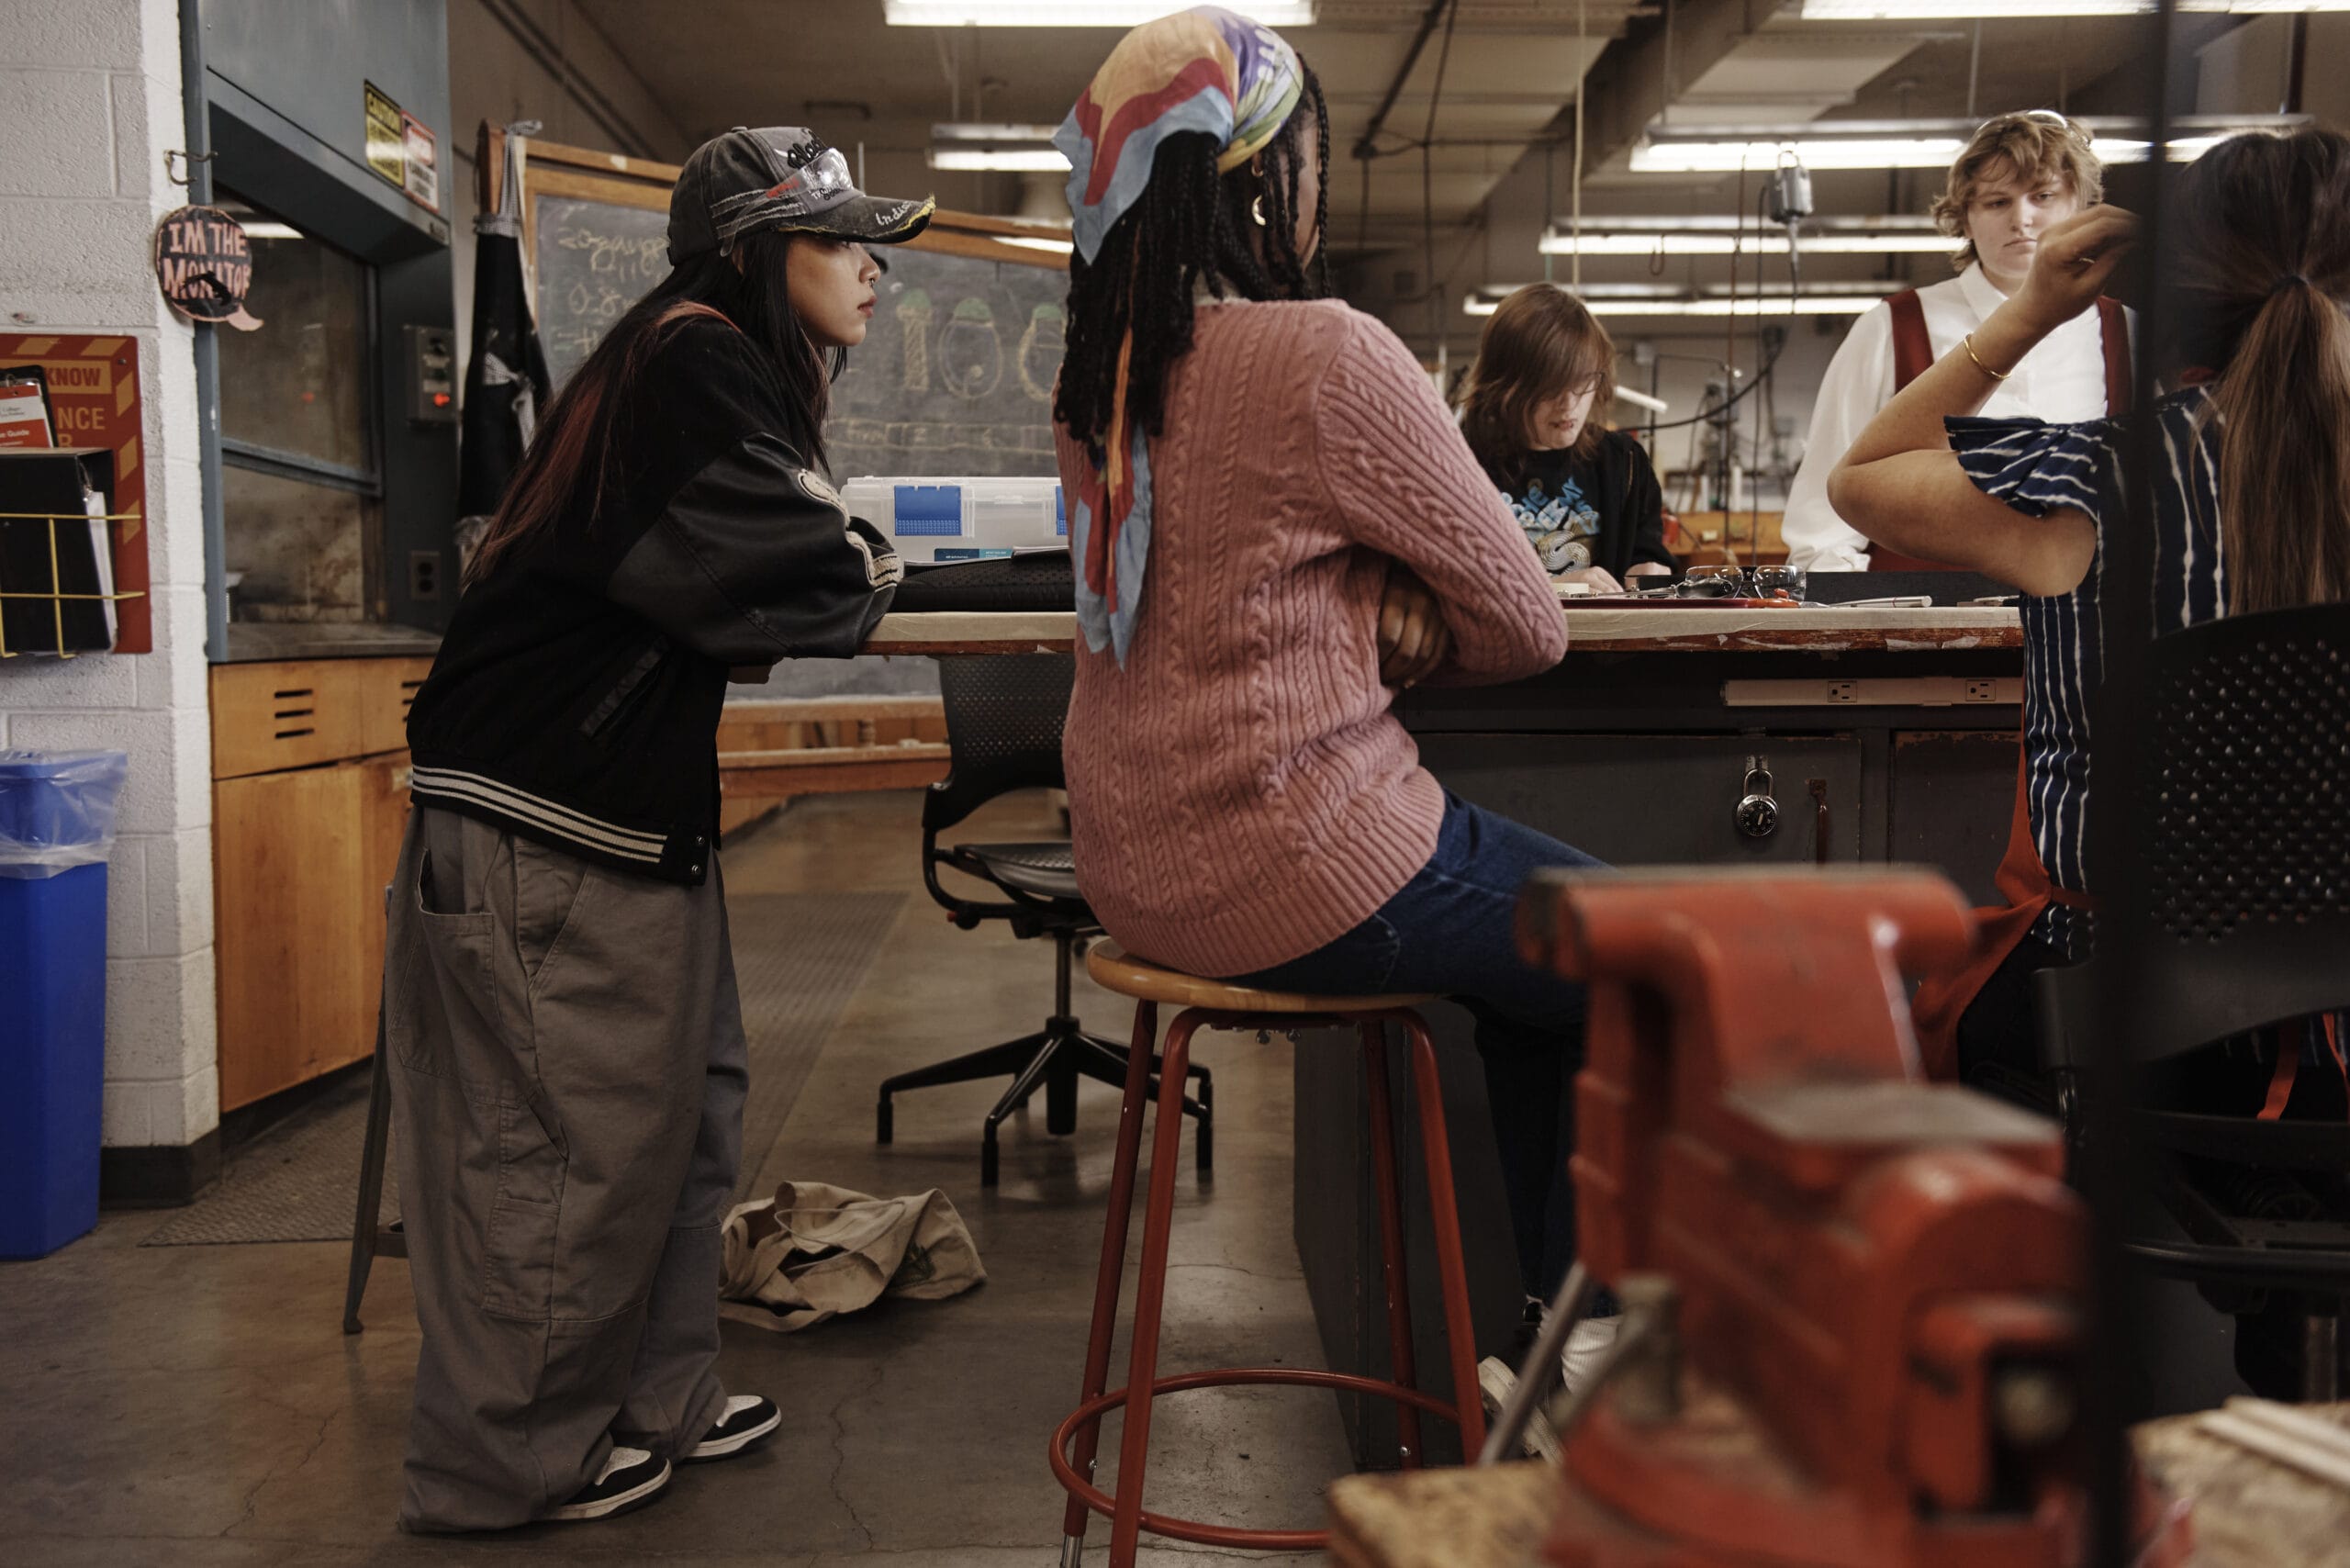 ewelry & Metalsmithing class (within the 3D Fine Arts department), taught by Faculty member Tzu-Ju Chen, in Collins 308.